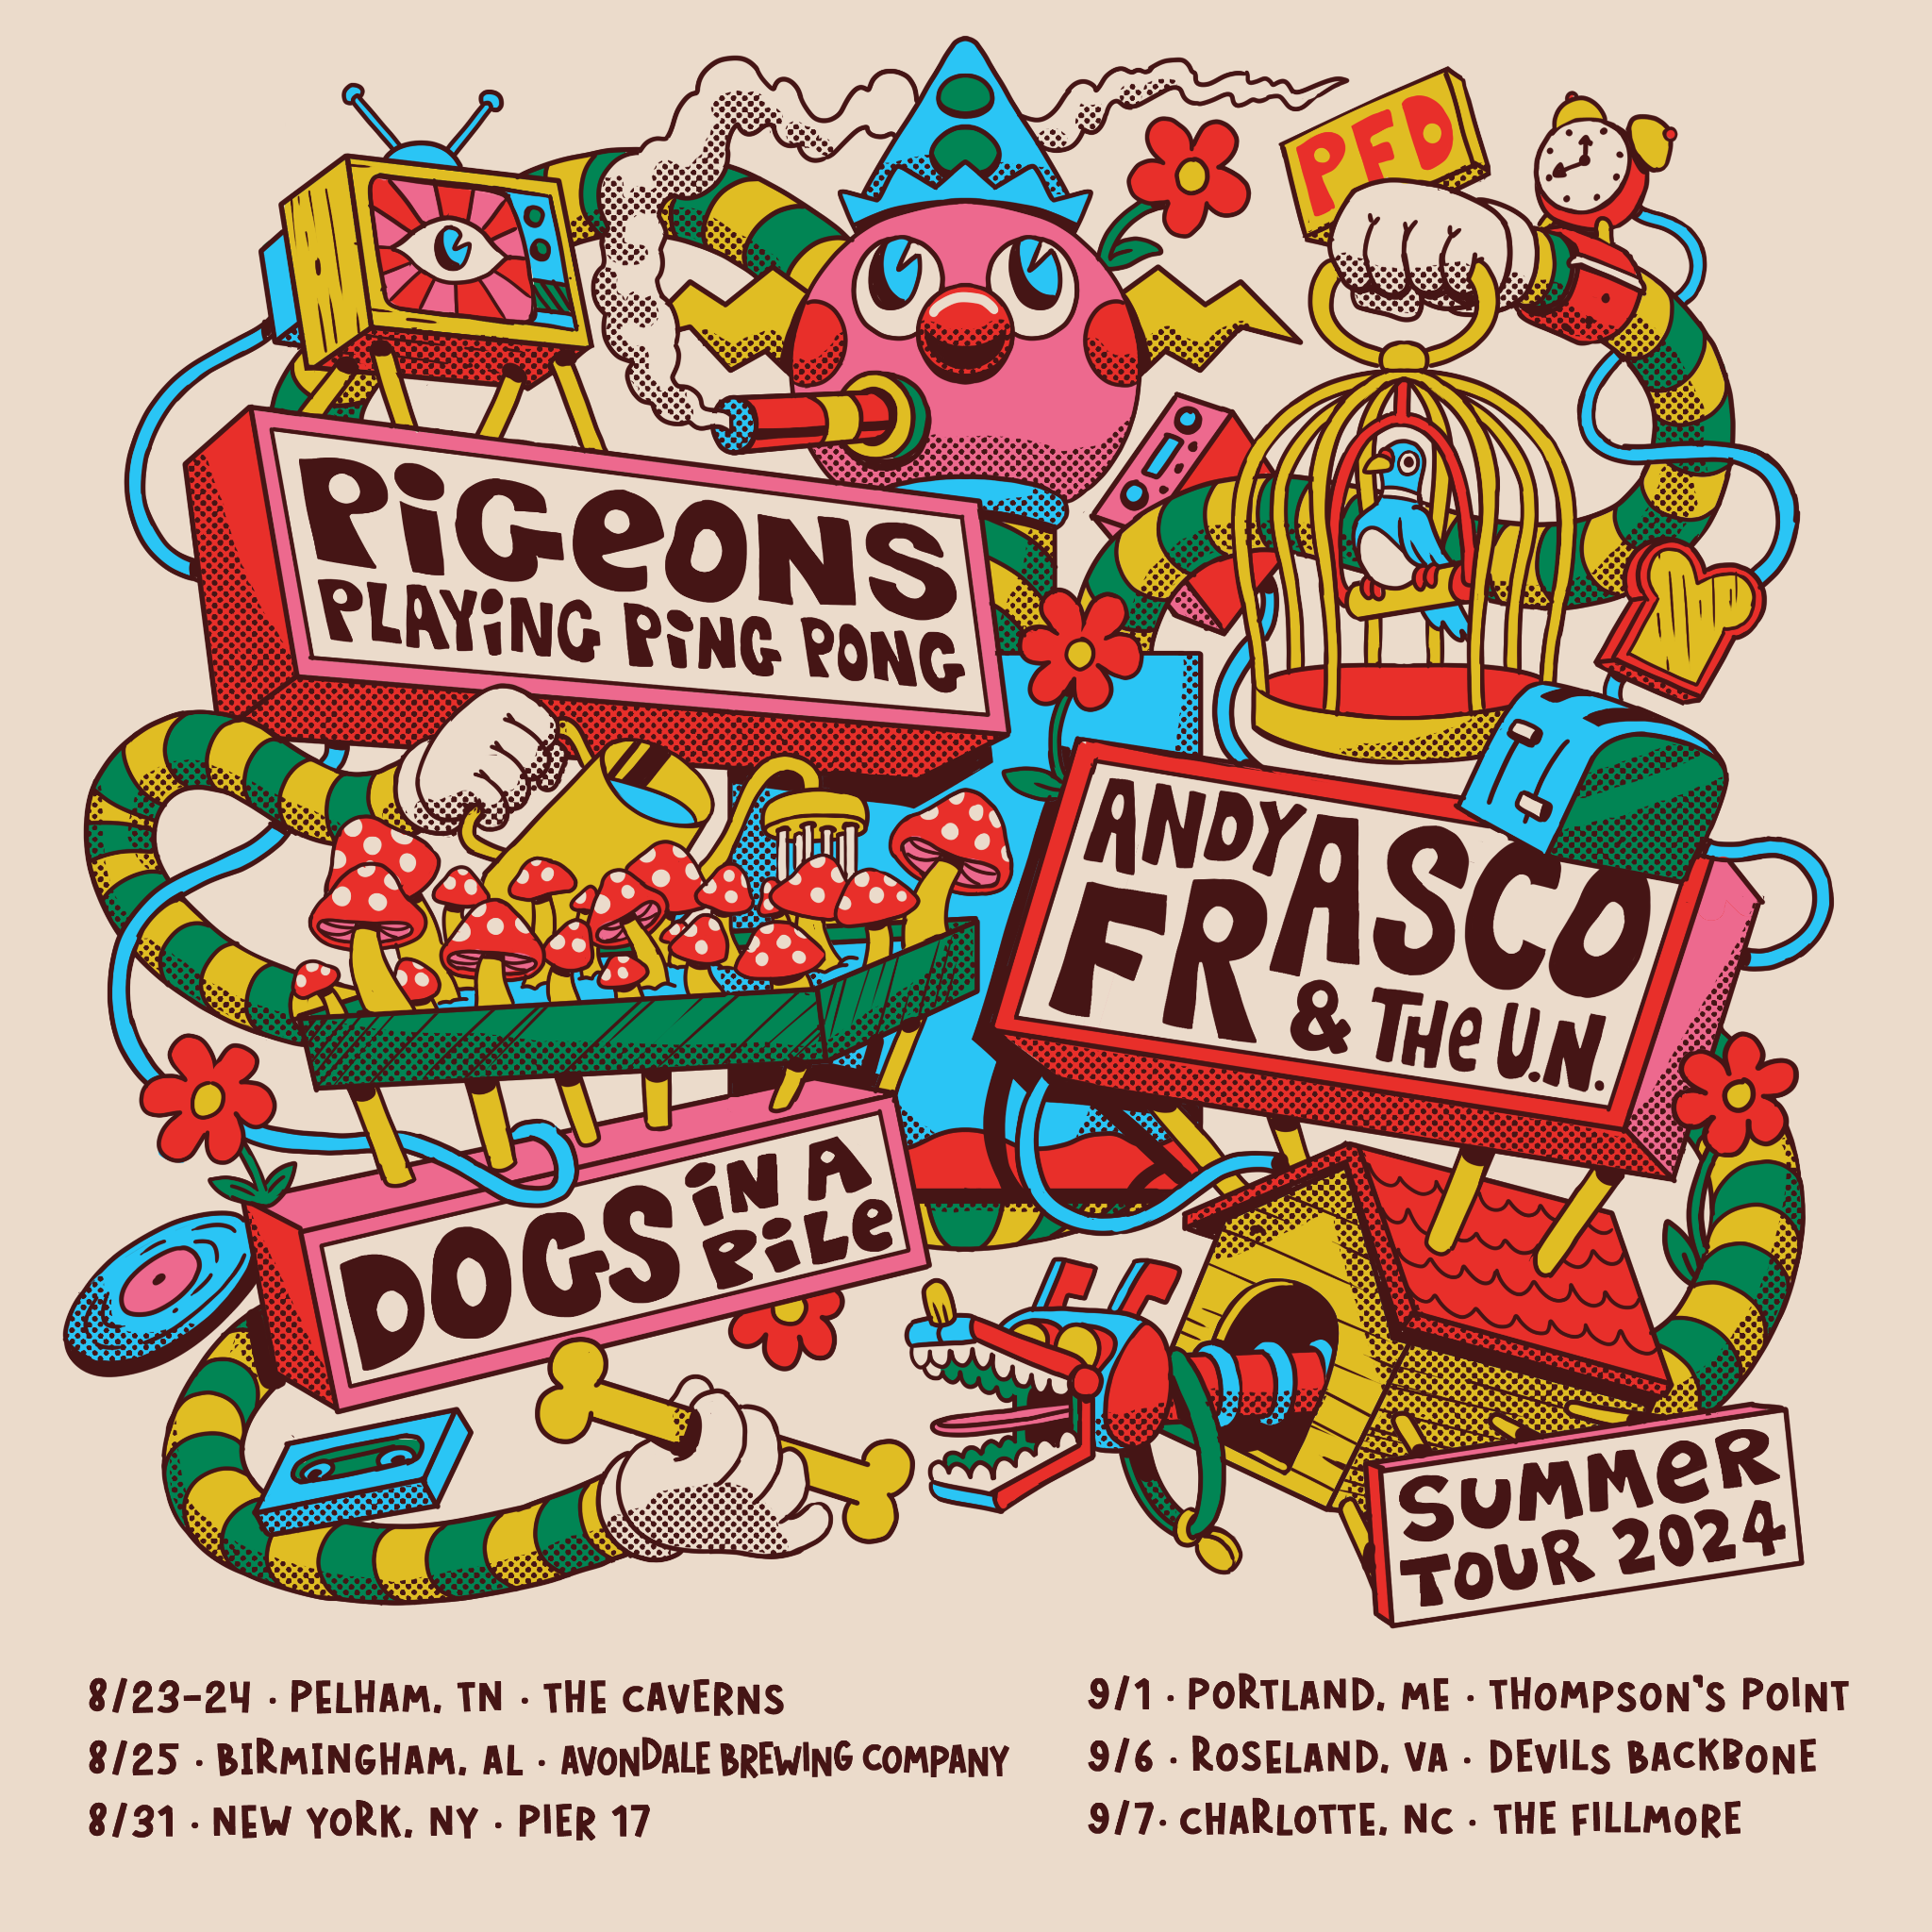 Pigeons Playing Ping Pong, Andy Frasco & The U.N., and Dogs in a Pile Set to Extend the "Pigeons Frasco Dogs Tour" with New Dates